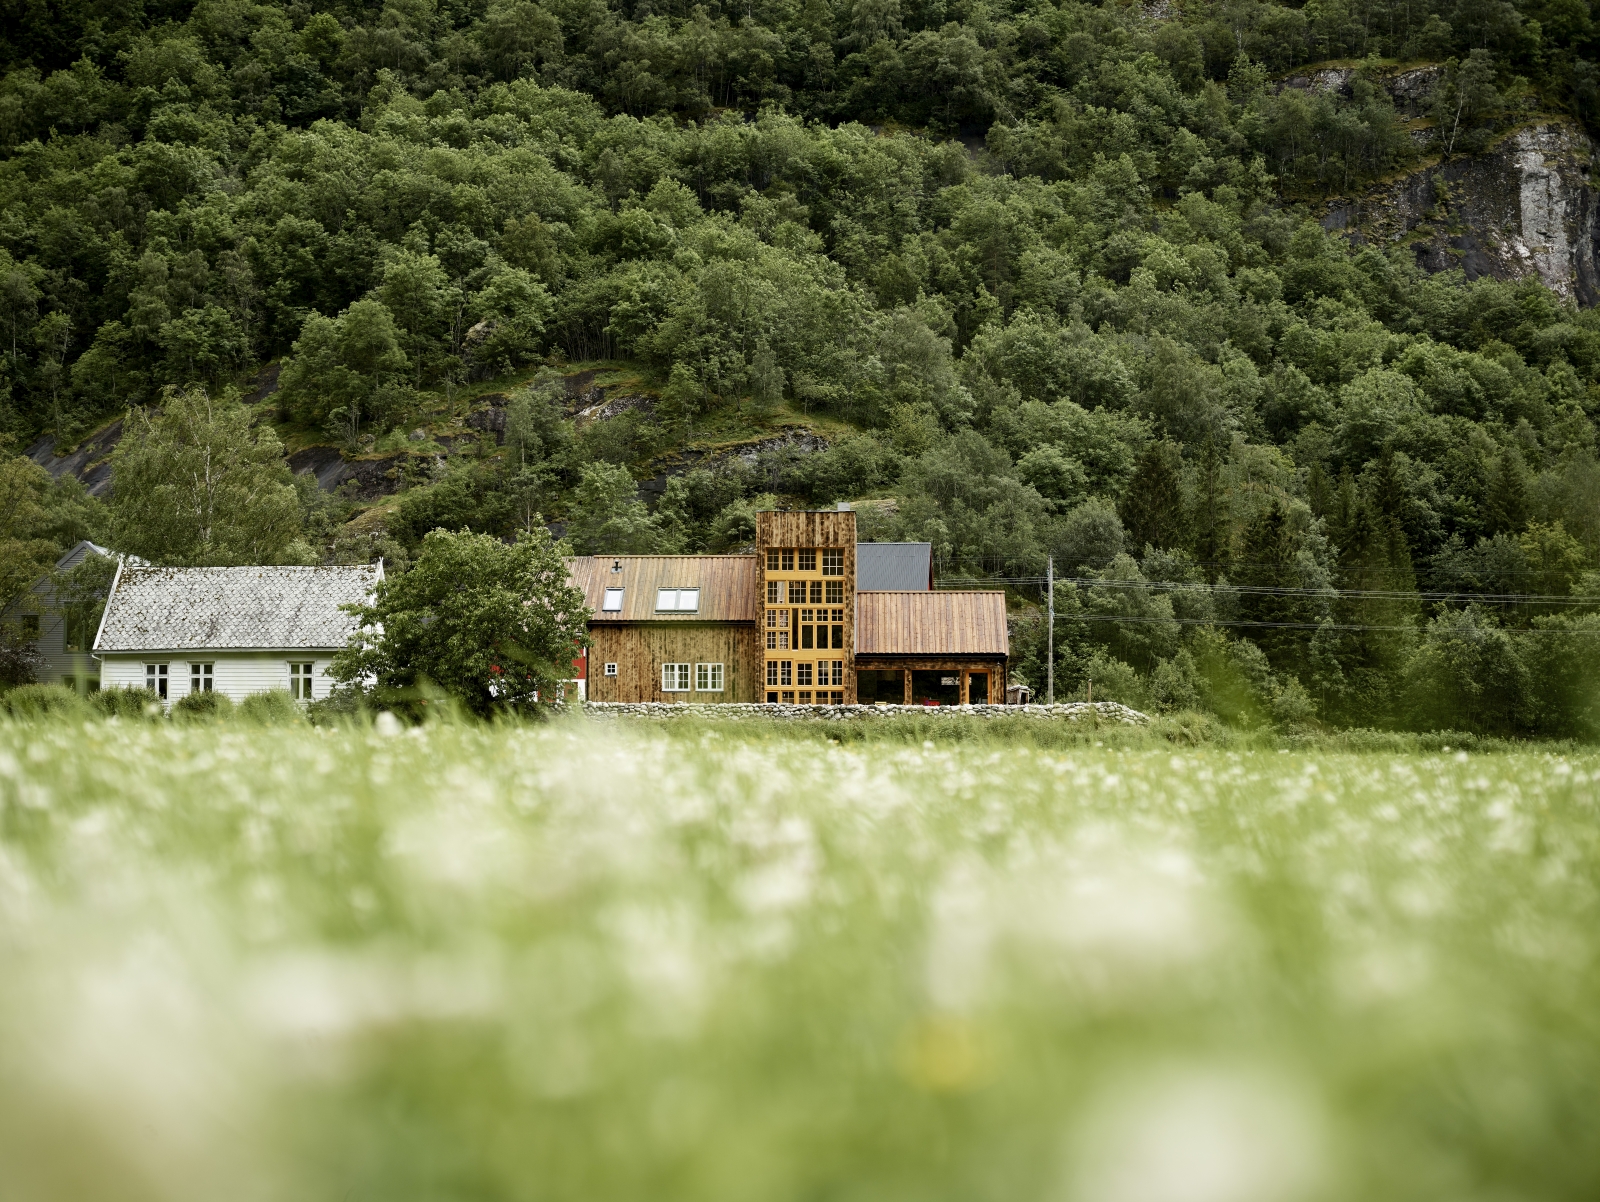 View of exterior from fields at 29-2 Aurland in Norway